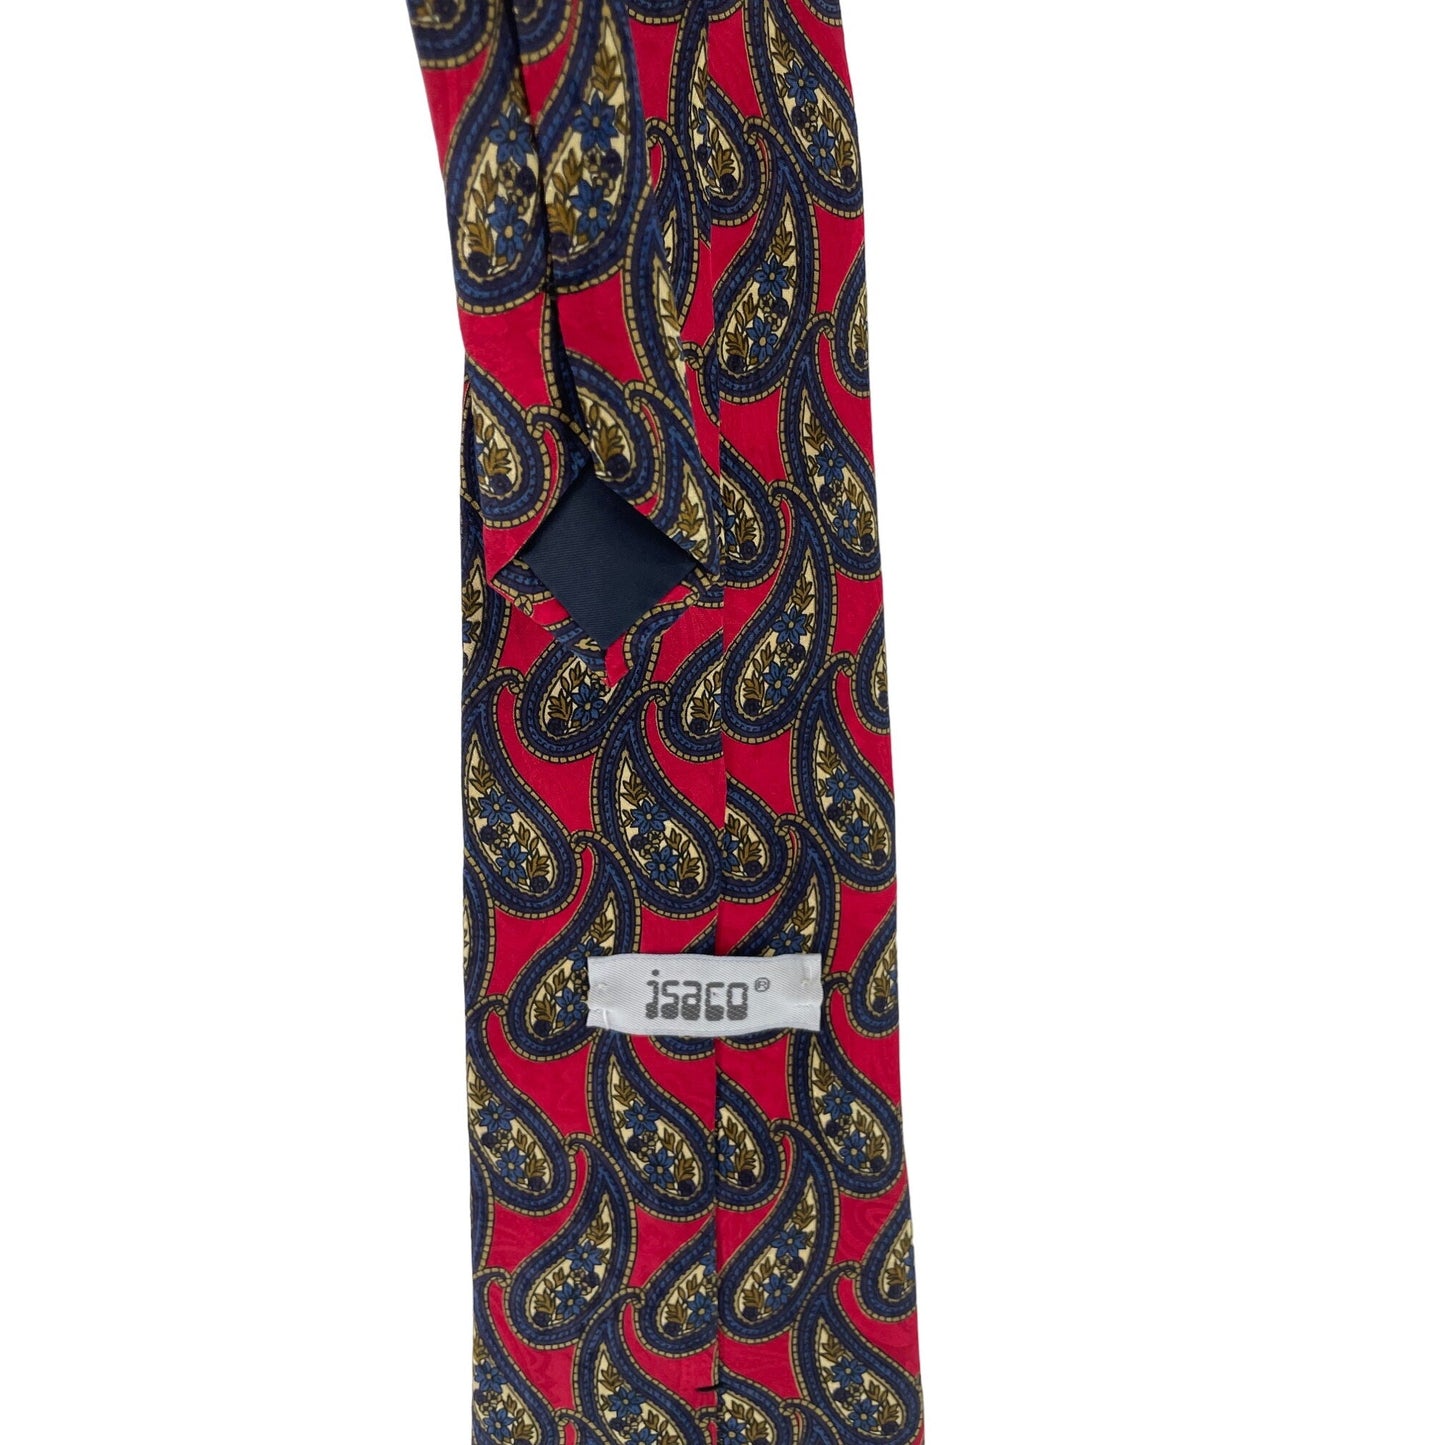 Isaco Men's Red Silk Dress Tie With Tan/Olive/Navy Paisley Print